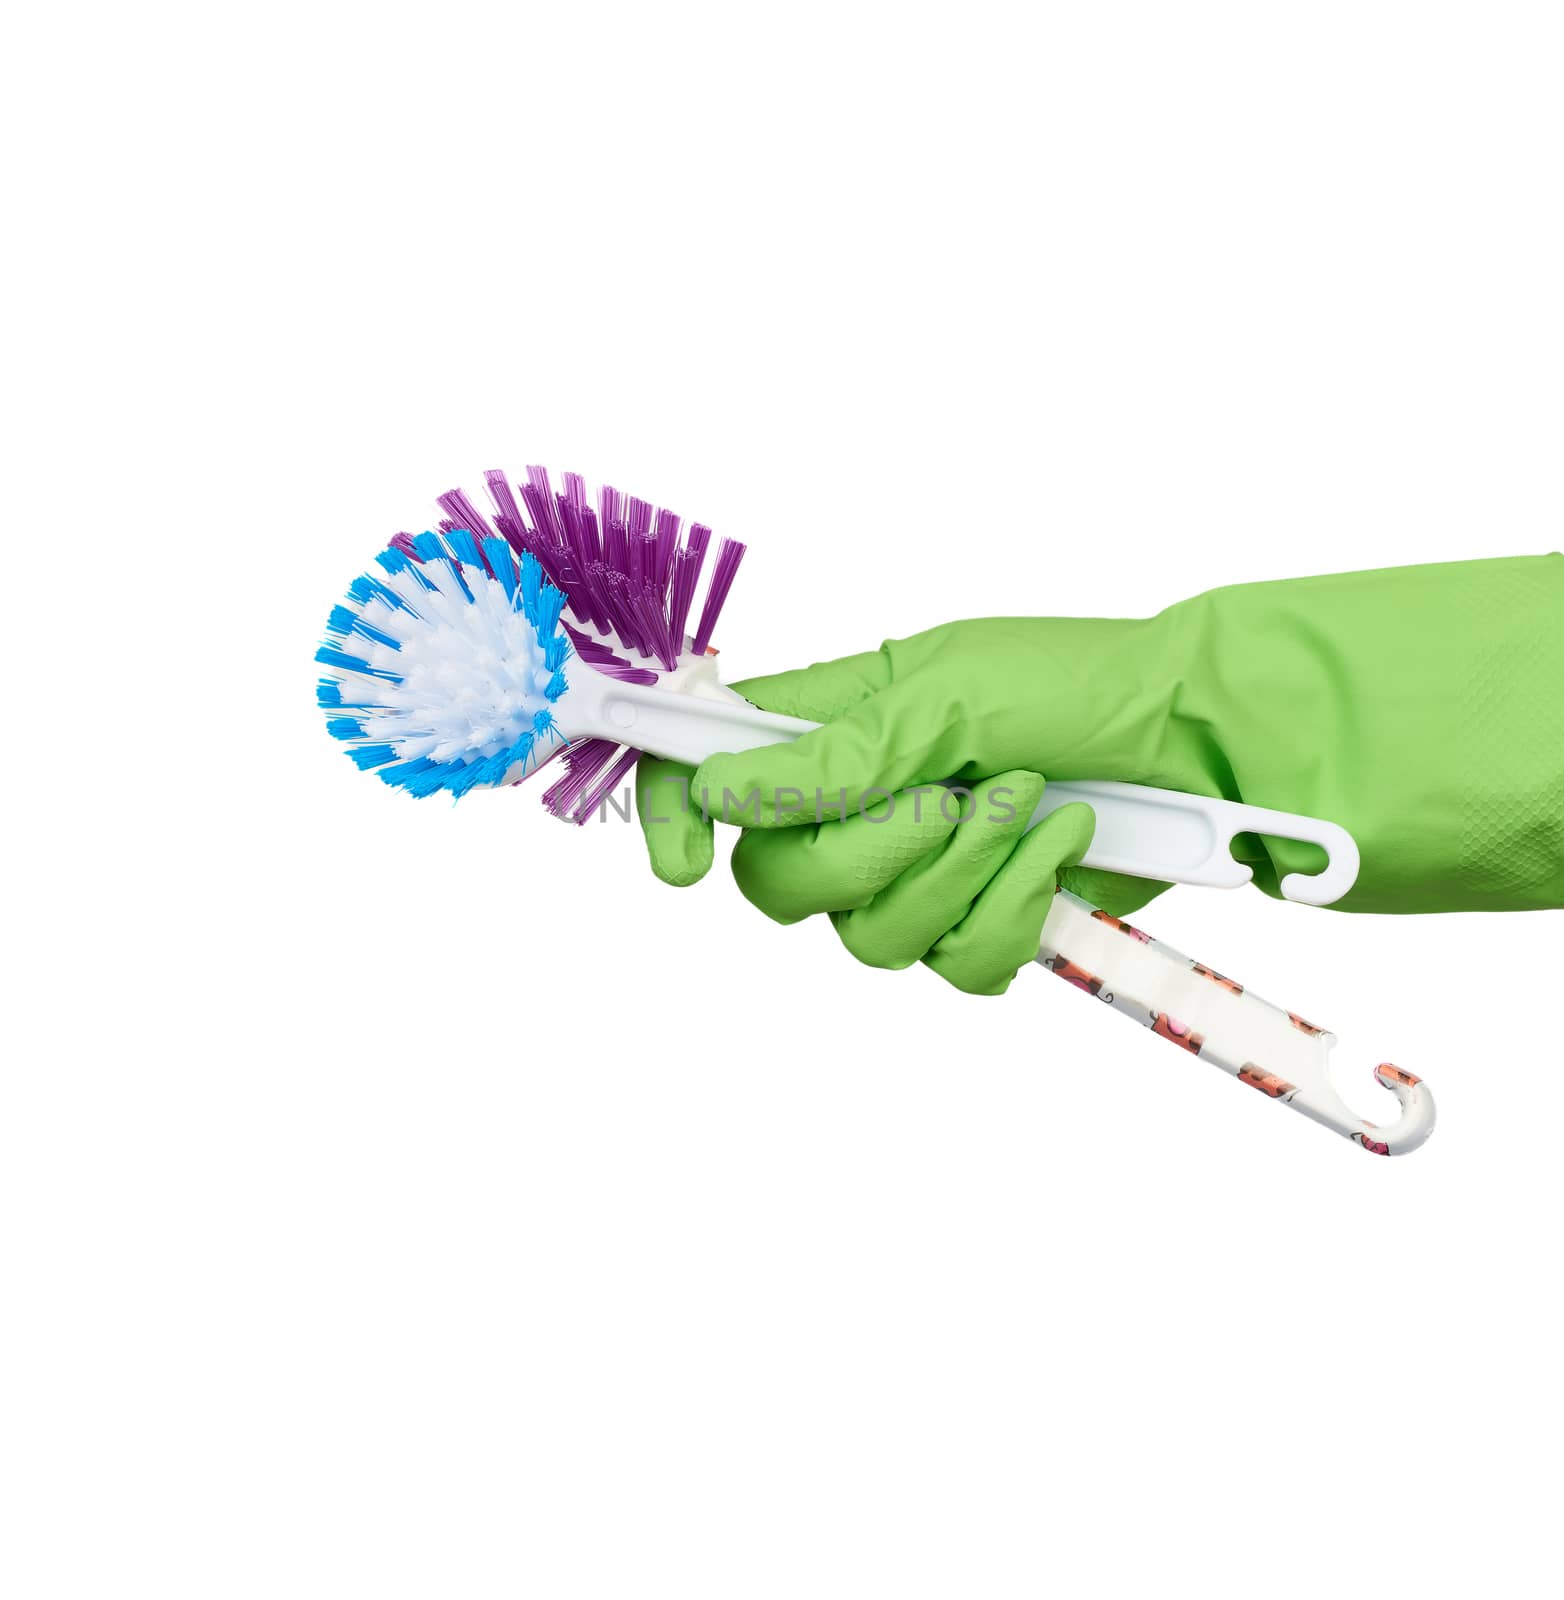 white plastic cleaning brushes in hand, protective green glove o by ndanko